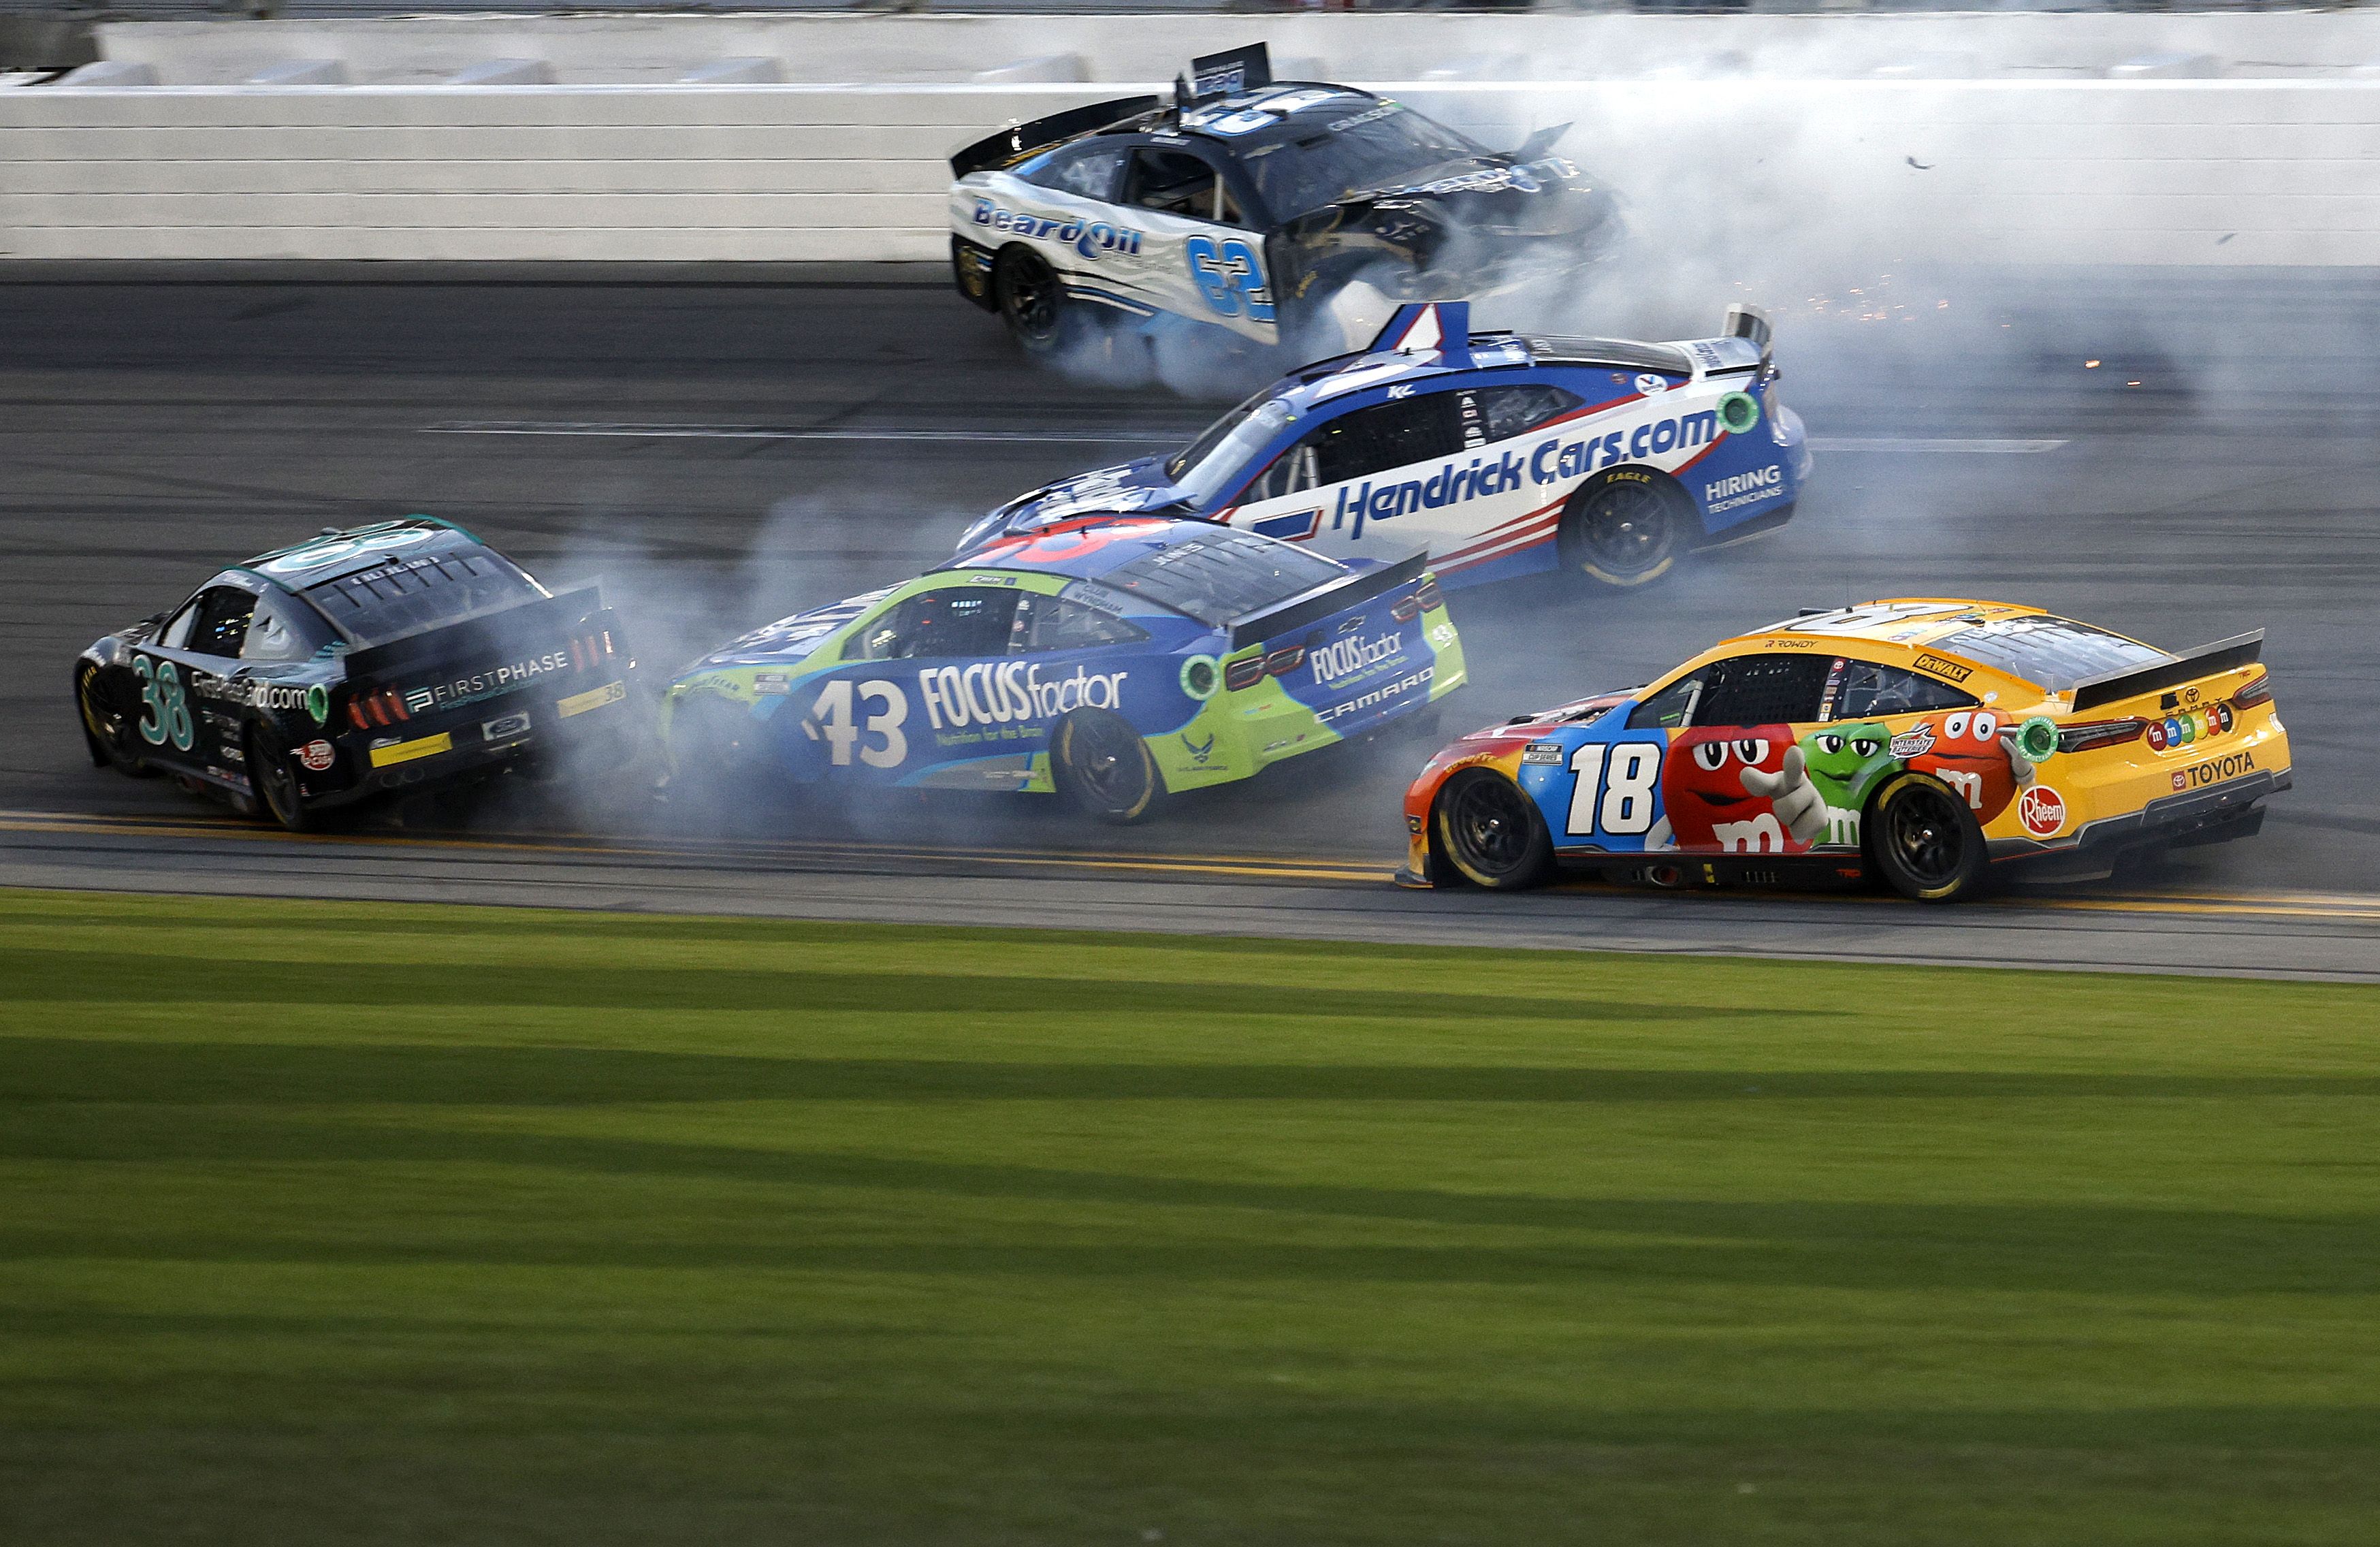 Heres the First Race Report Card from NASCARs Next Gen at Daytona 500